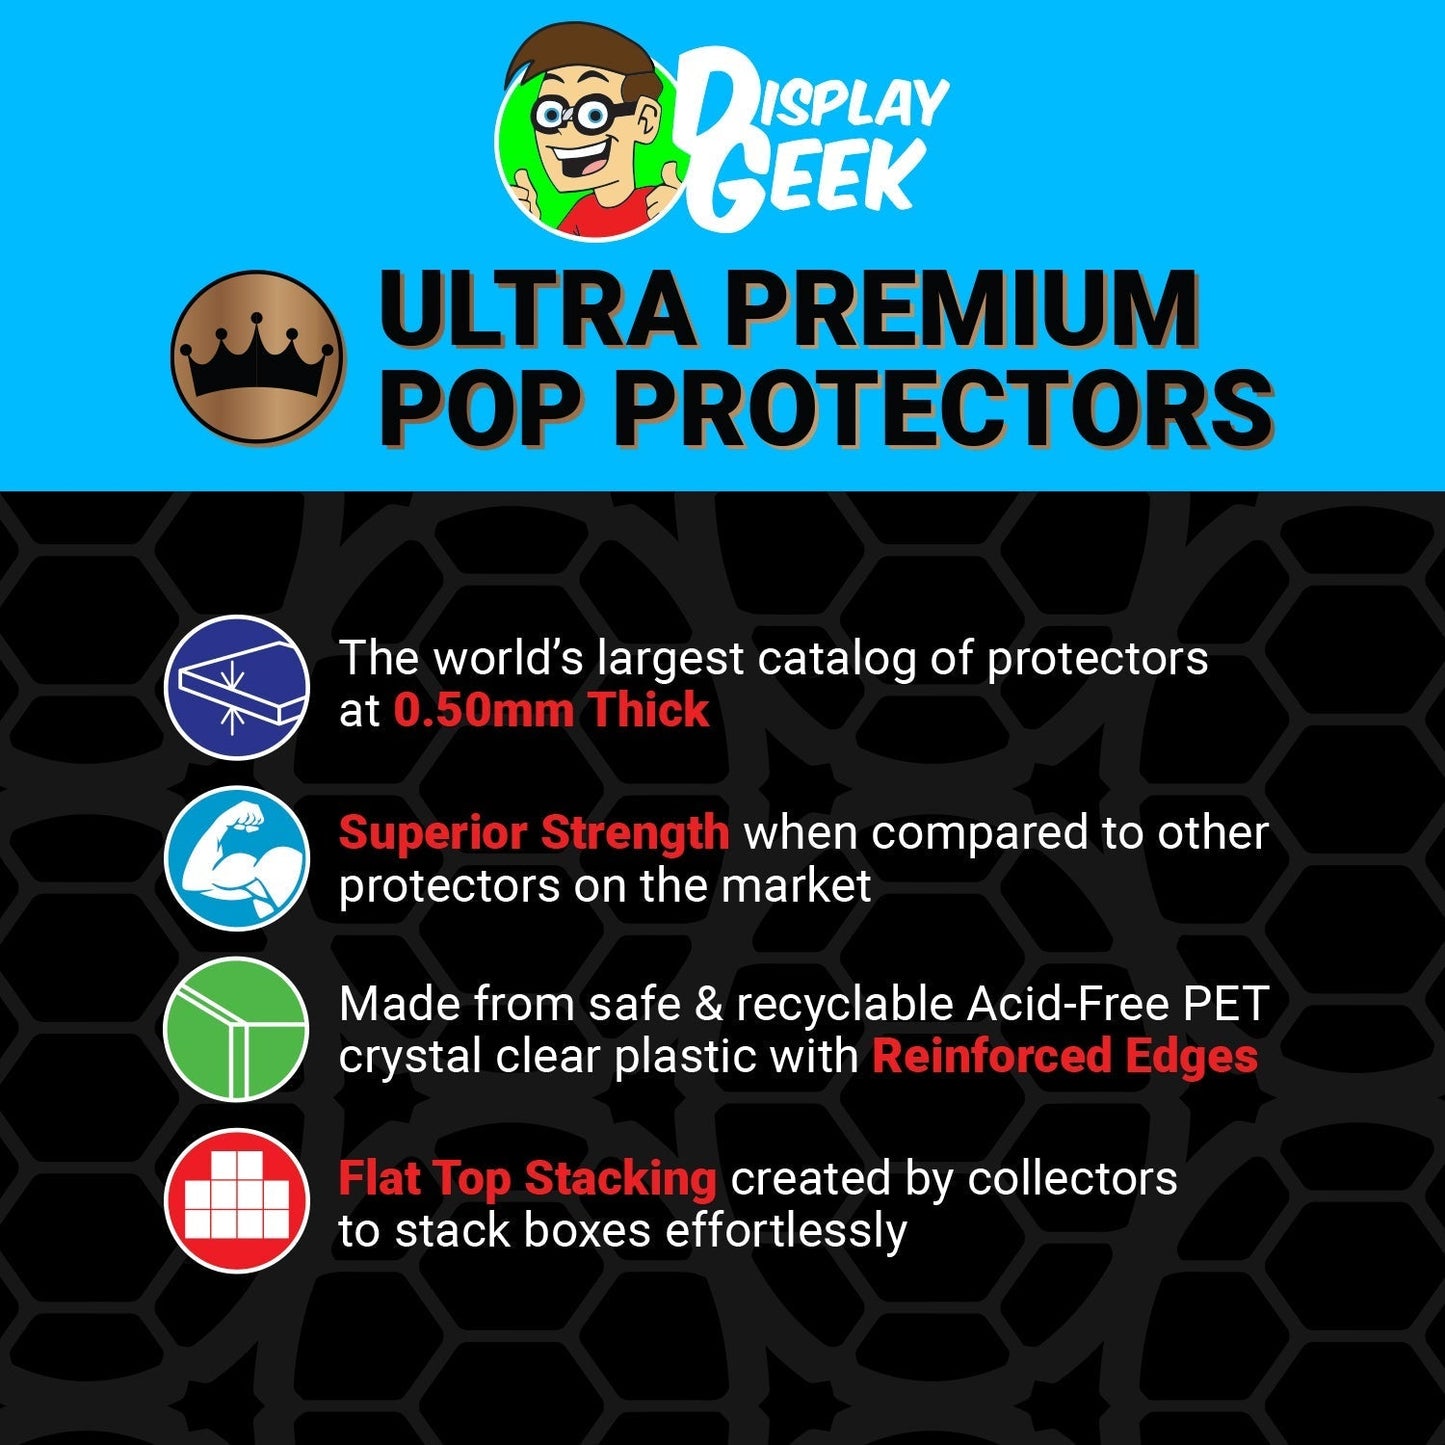 Pop Protector for AC/DC in Concert #02 Funko Pop Moment Deluxe - PPG Pop Protector Guide Search Created by Display Geek